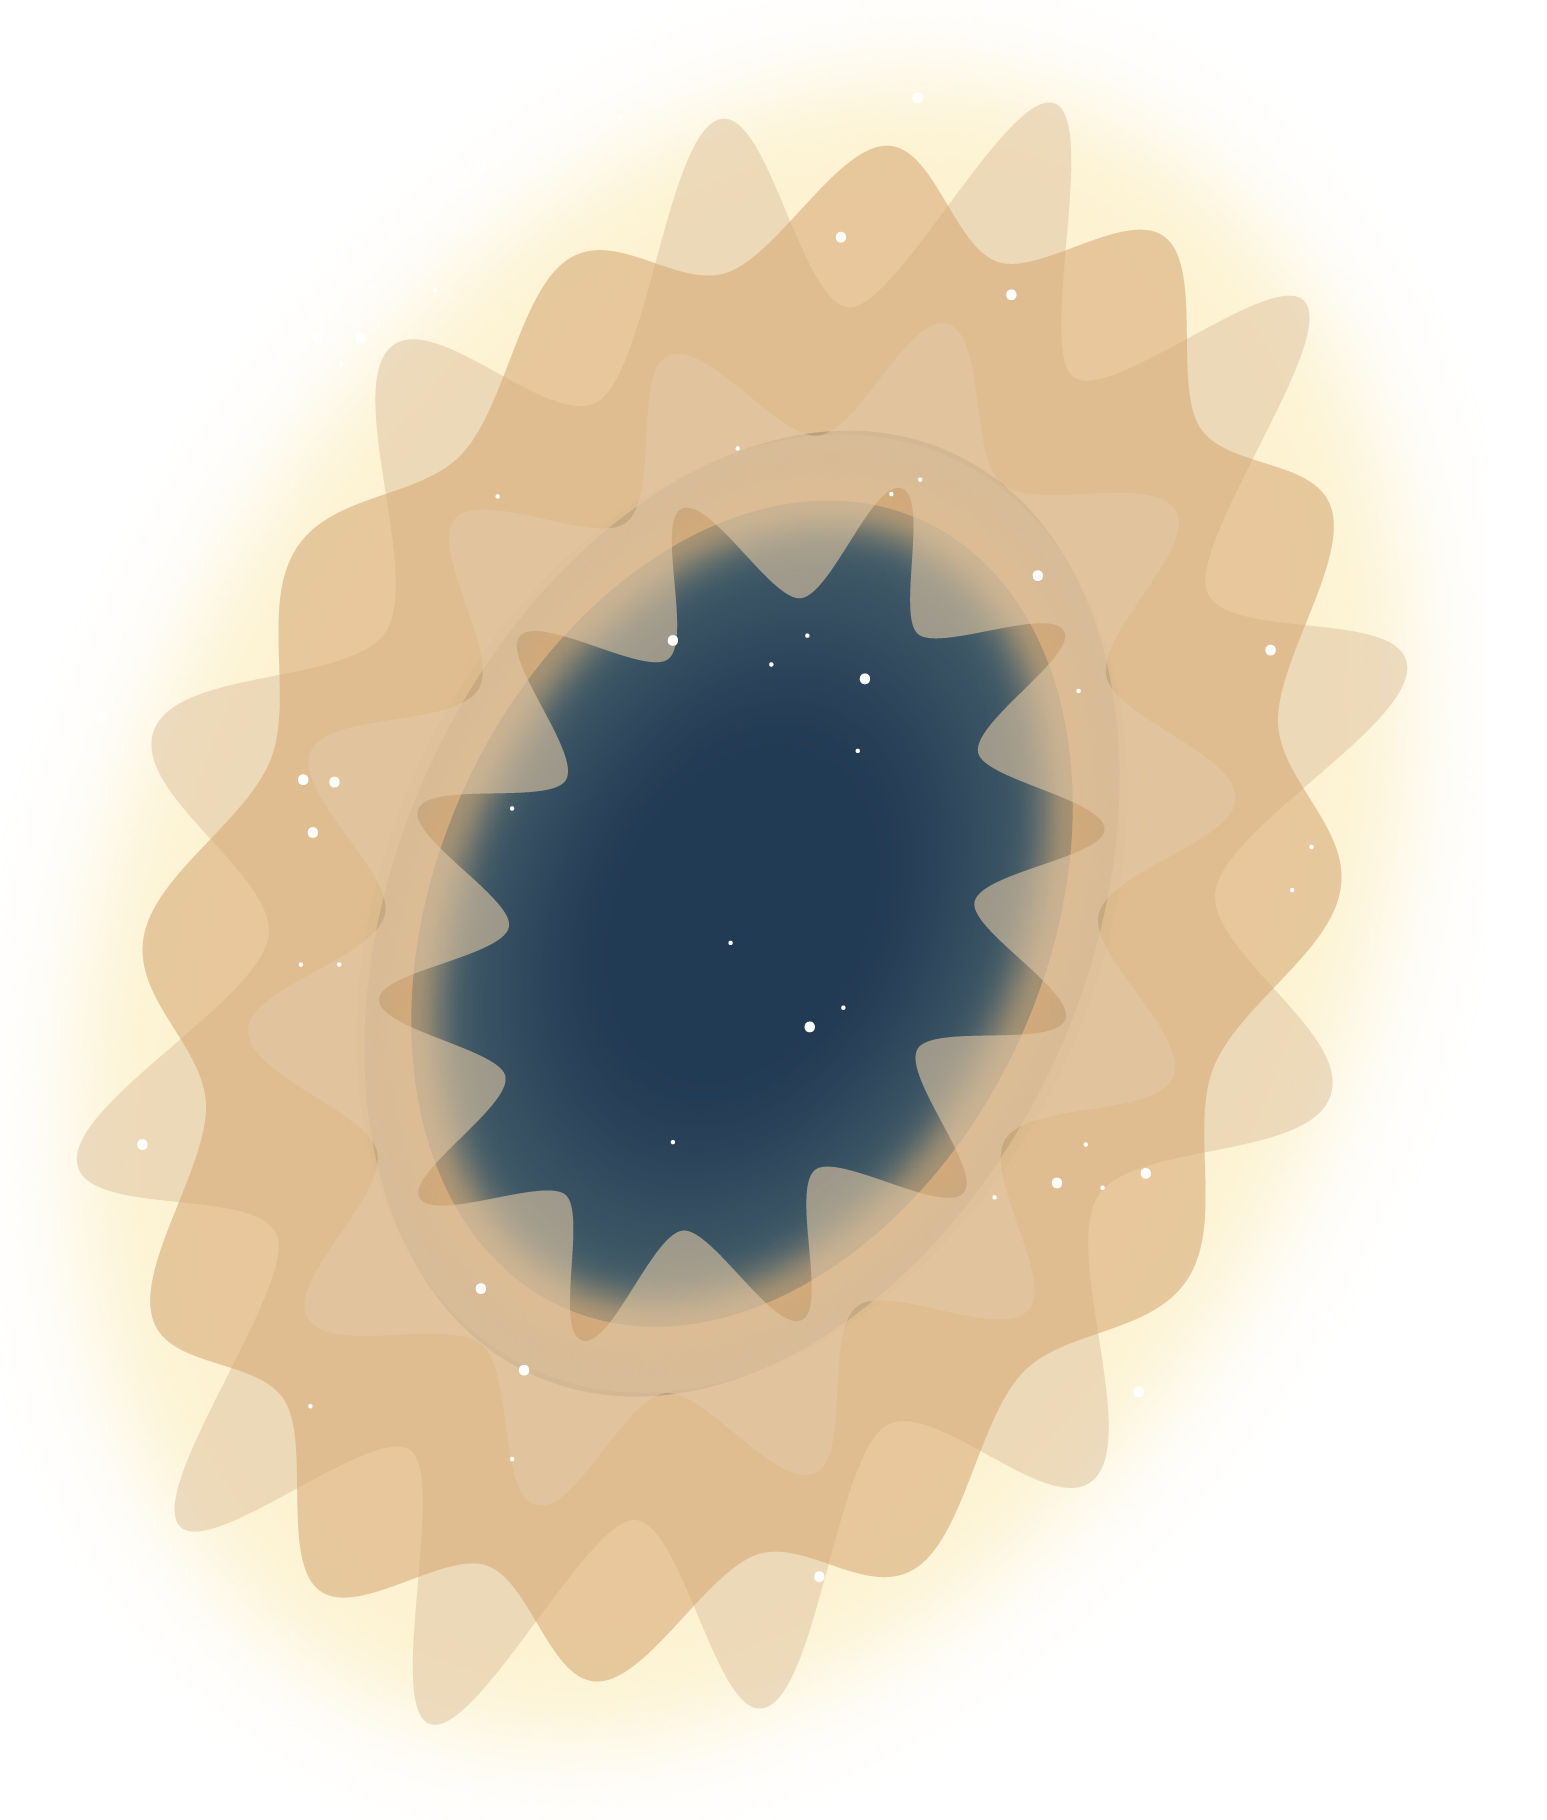 An angled oval illustration of a supernova. The colors depicted in this illustration are for artistic purposes only.